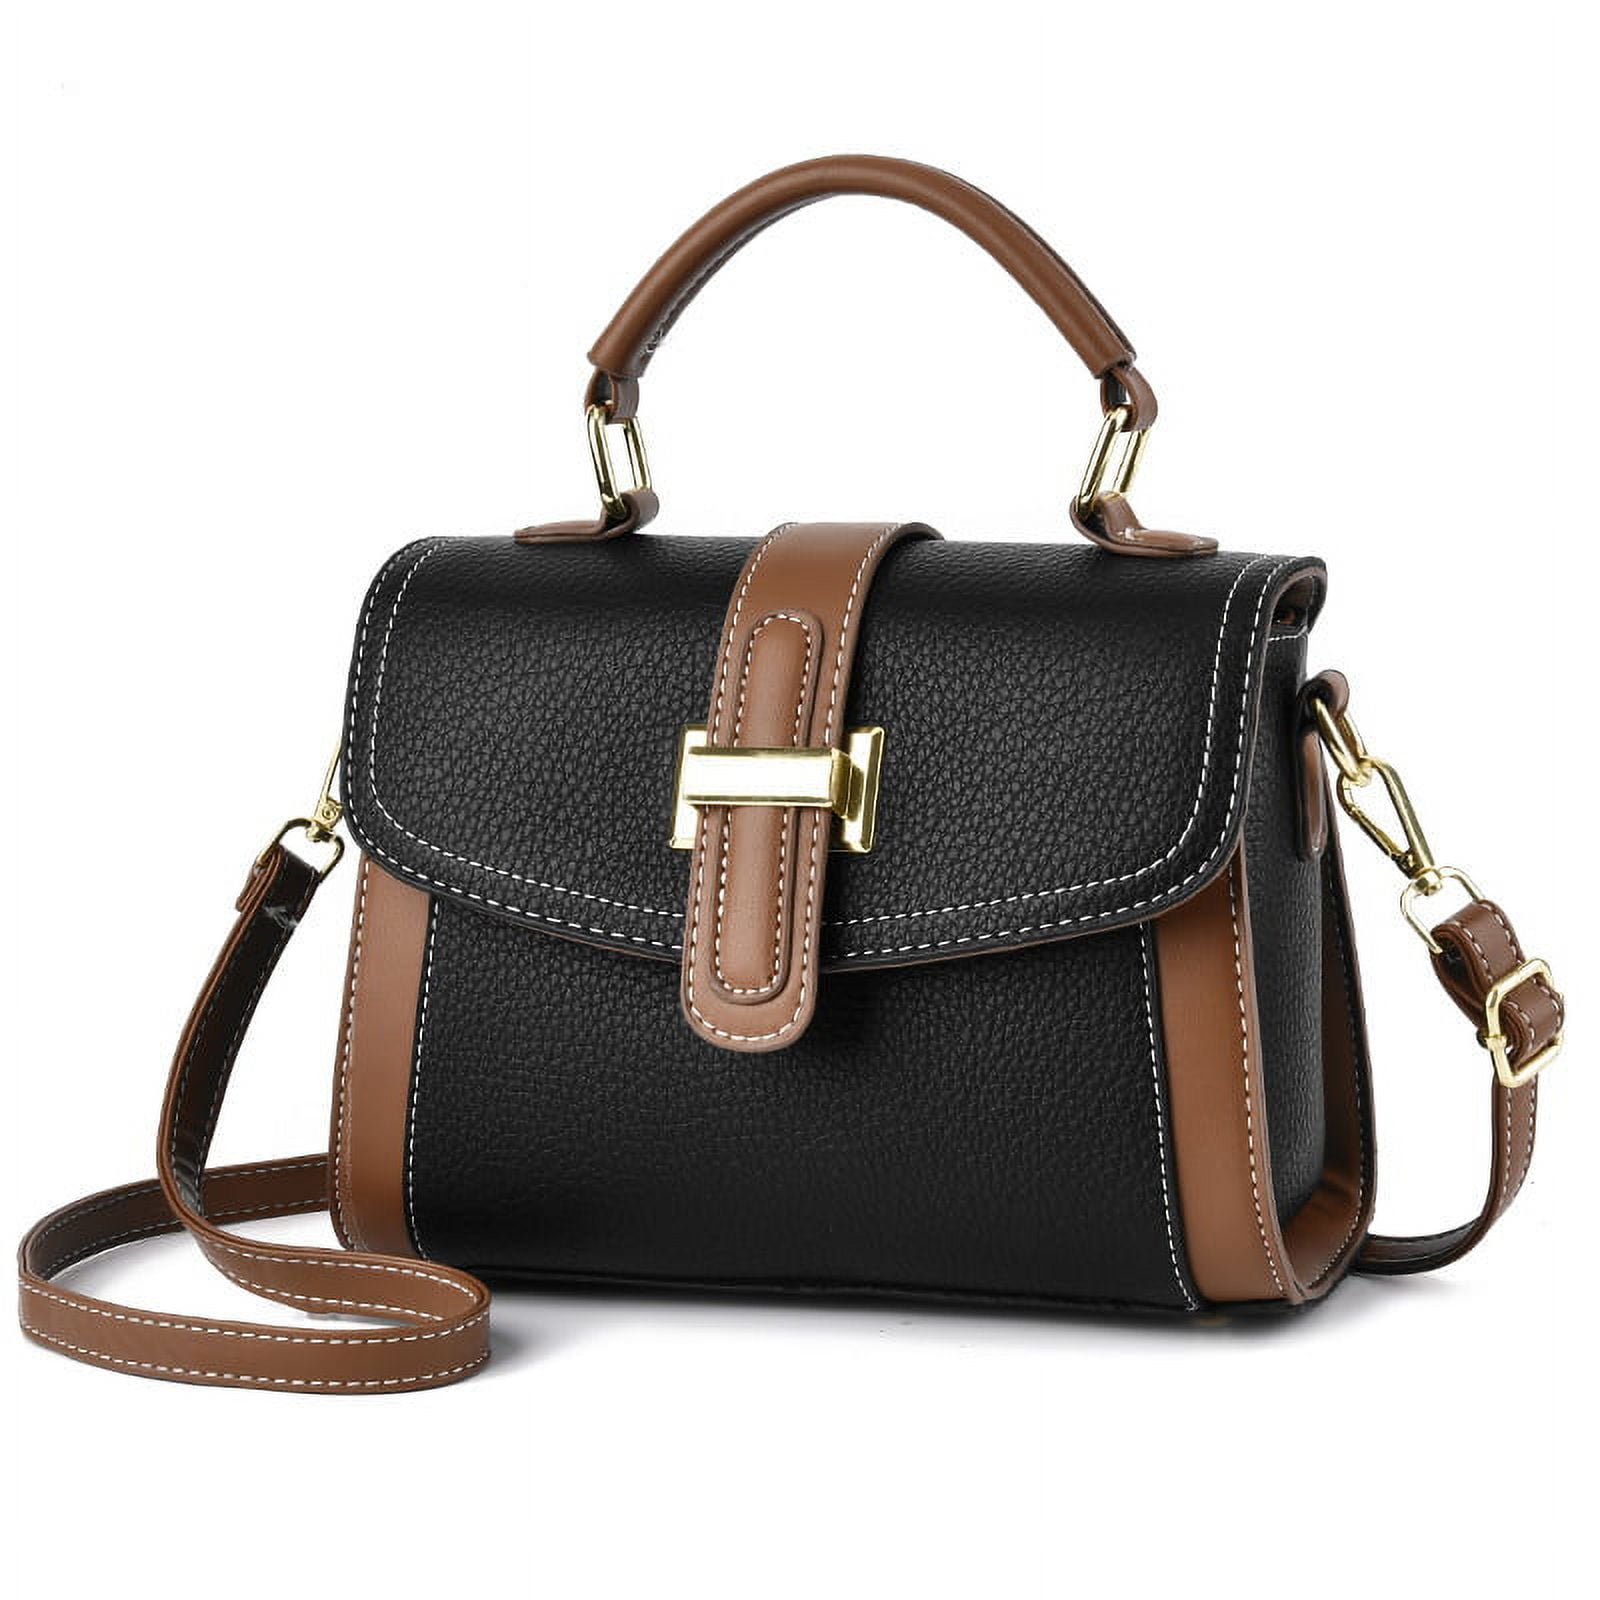 Small Square Bag Leather Women Shoulder Purses with Chain Strap Stylish  Clutch Purse - Walmart.com